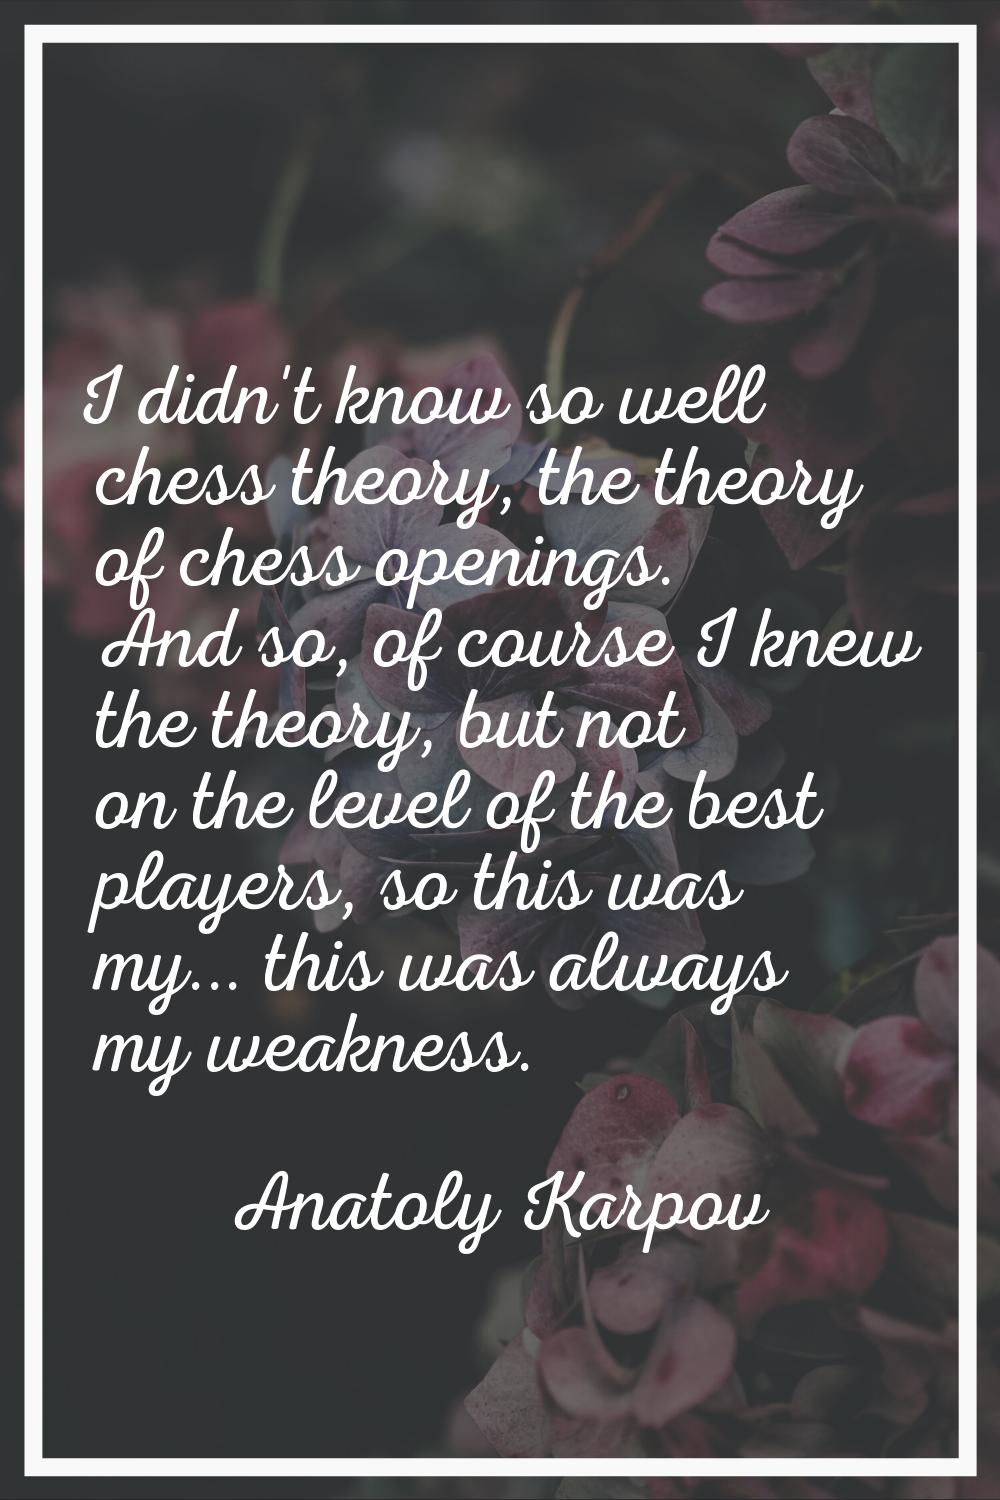 I didn't know so well chess theory, the theory of chess openings. And so, of course I knew the theo